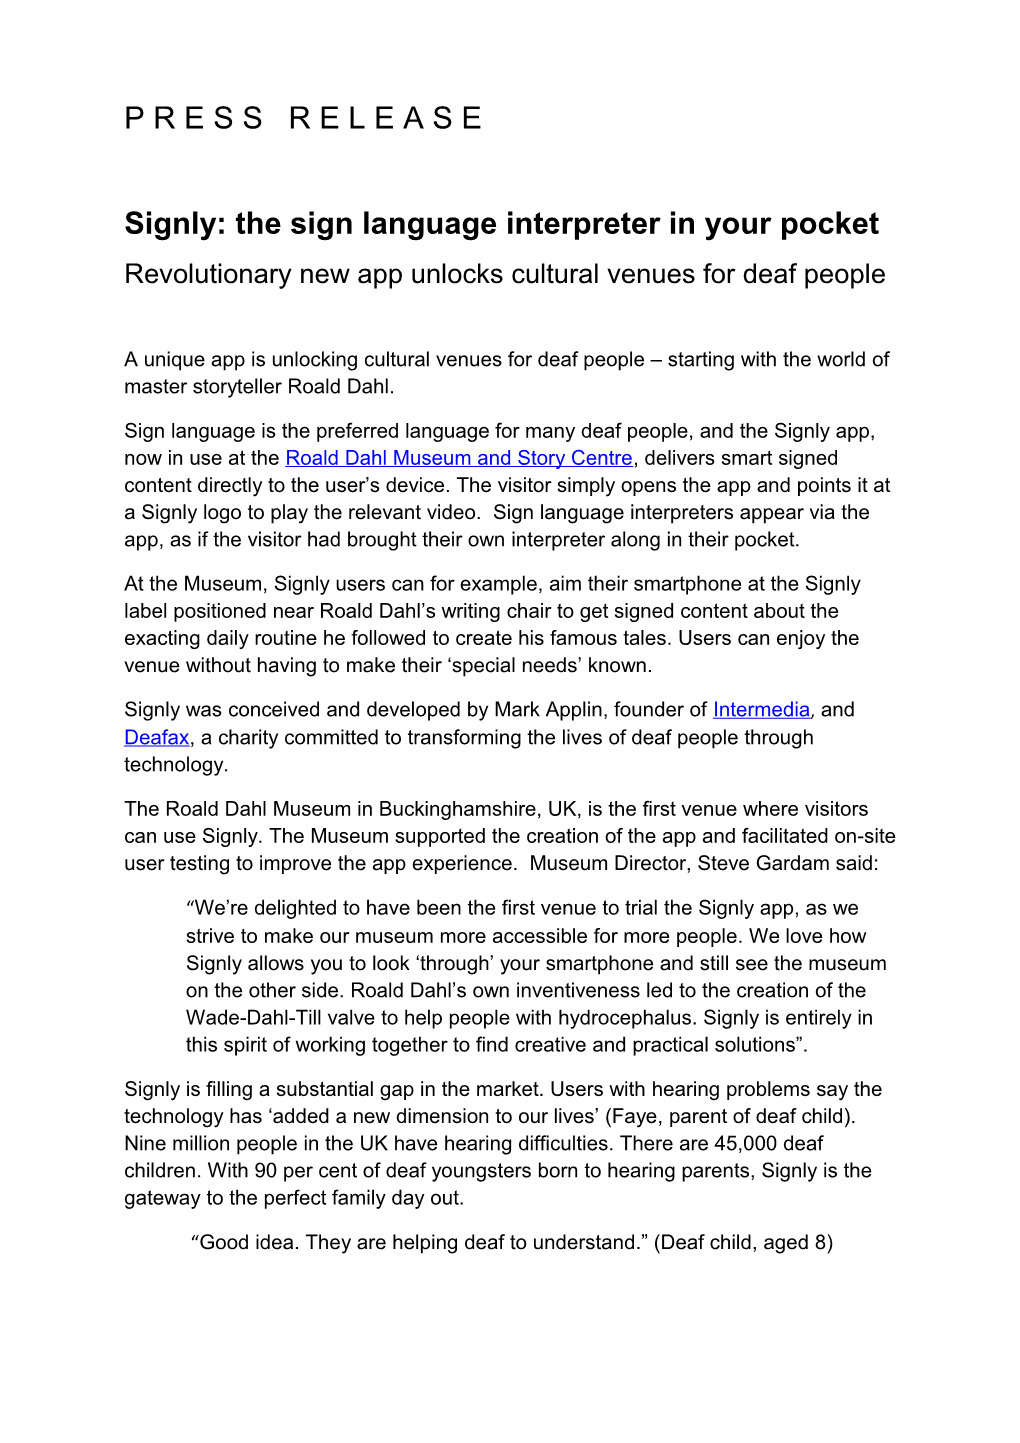 Signly: the Sign Language Interpreter in Your Pocket